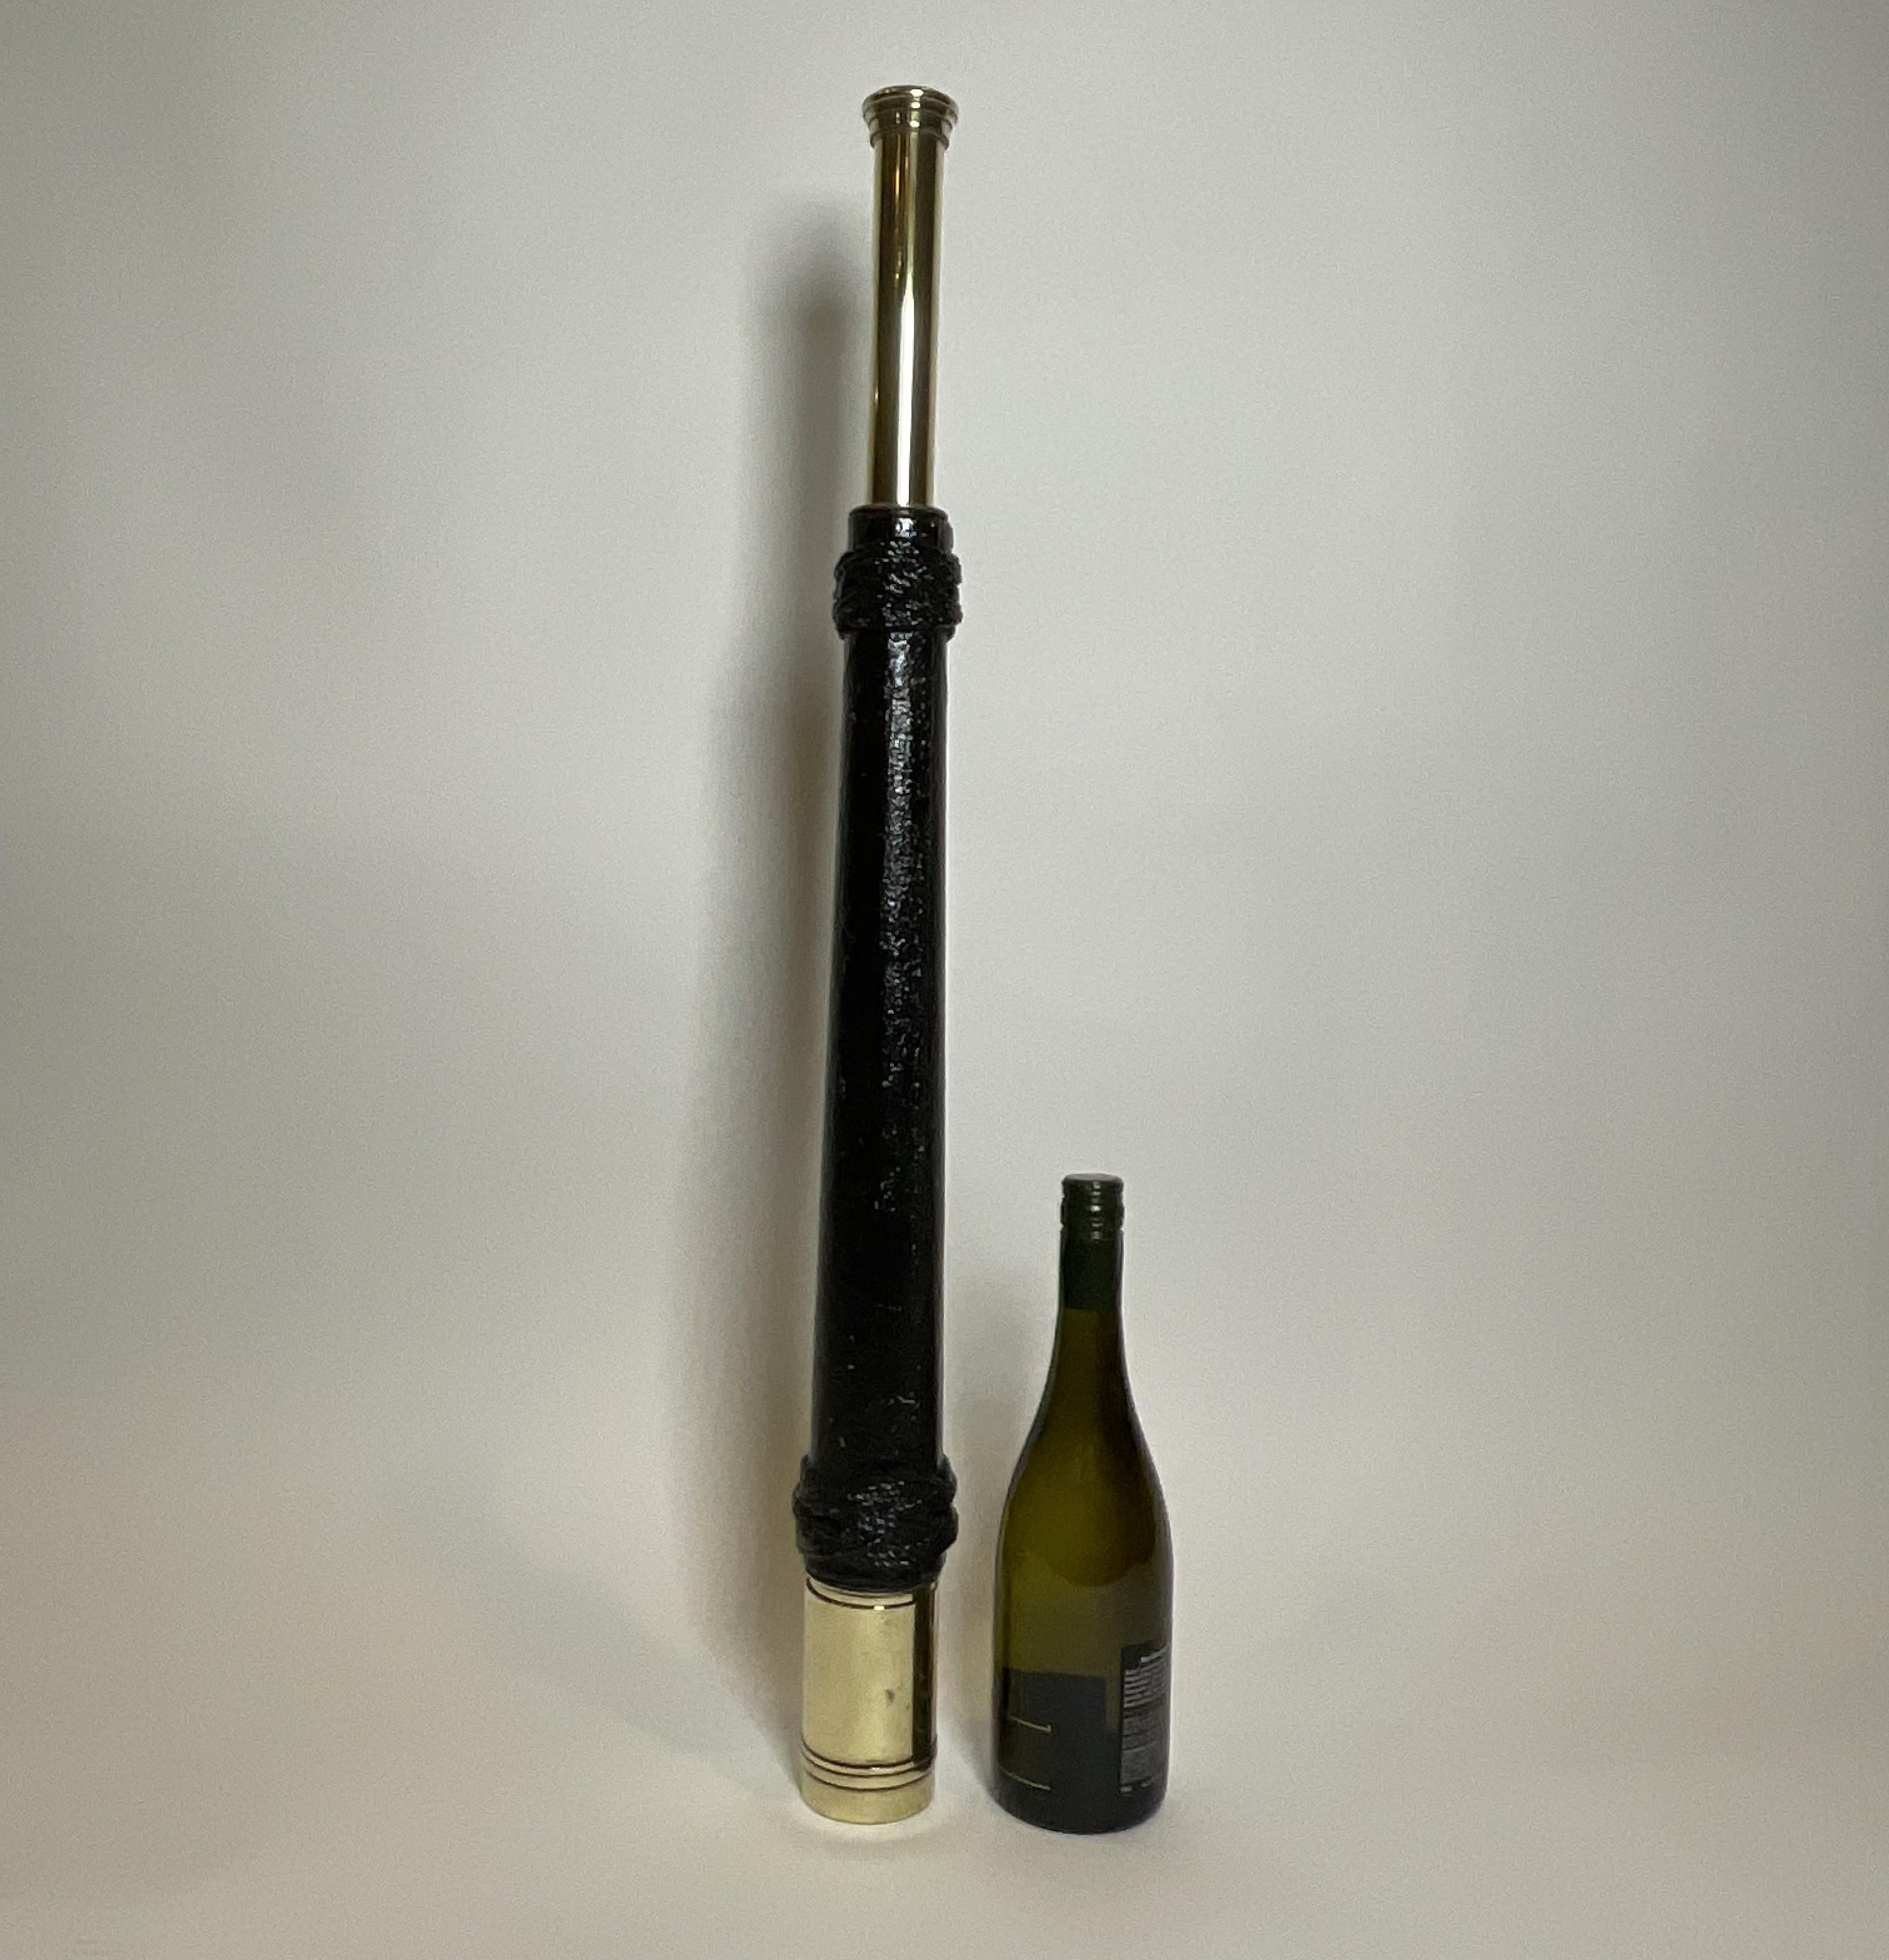 Early twentieth century ships telescope with a leather and rope wrapped barrel. Single focal tube is engraved Hughes and Son Ltd. London EC3. Circa 1920. Barrel end is fitted with a sunshade shroud.

Weight: 4 lbs.
Overall Dimensions: 30